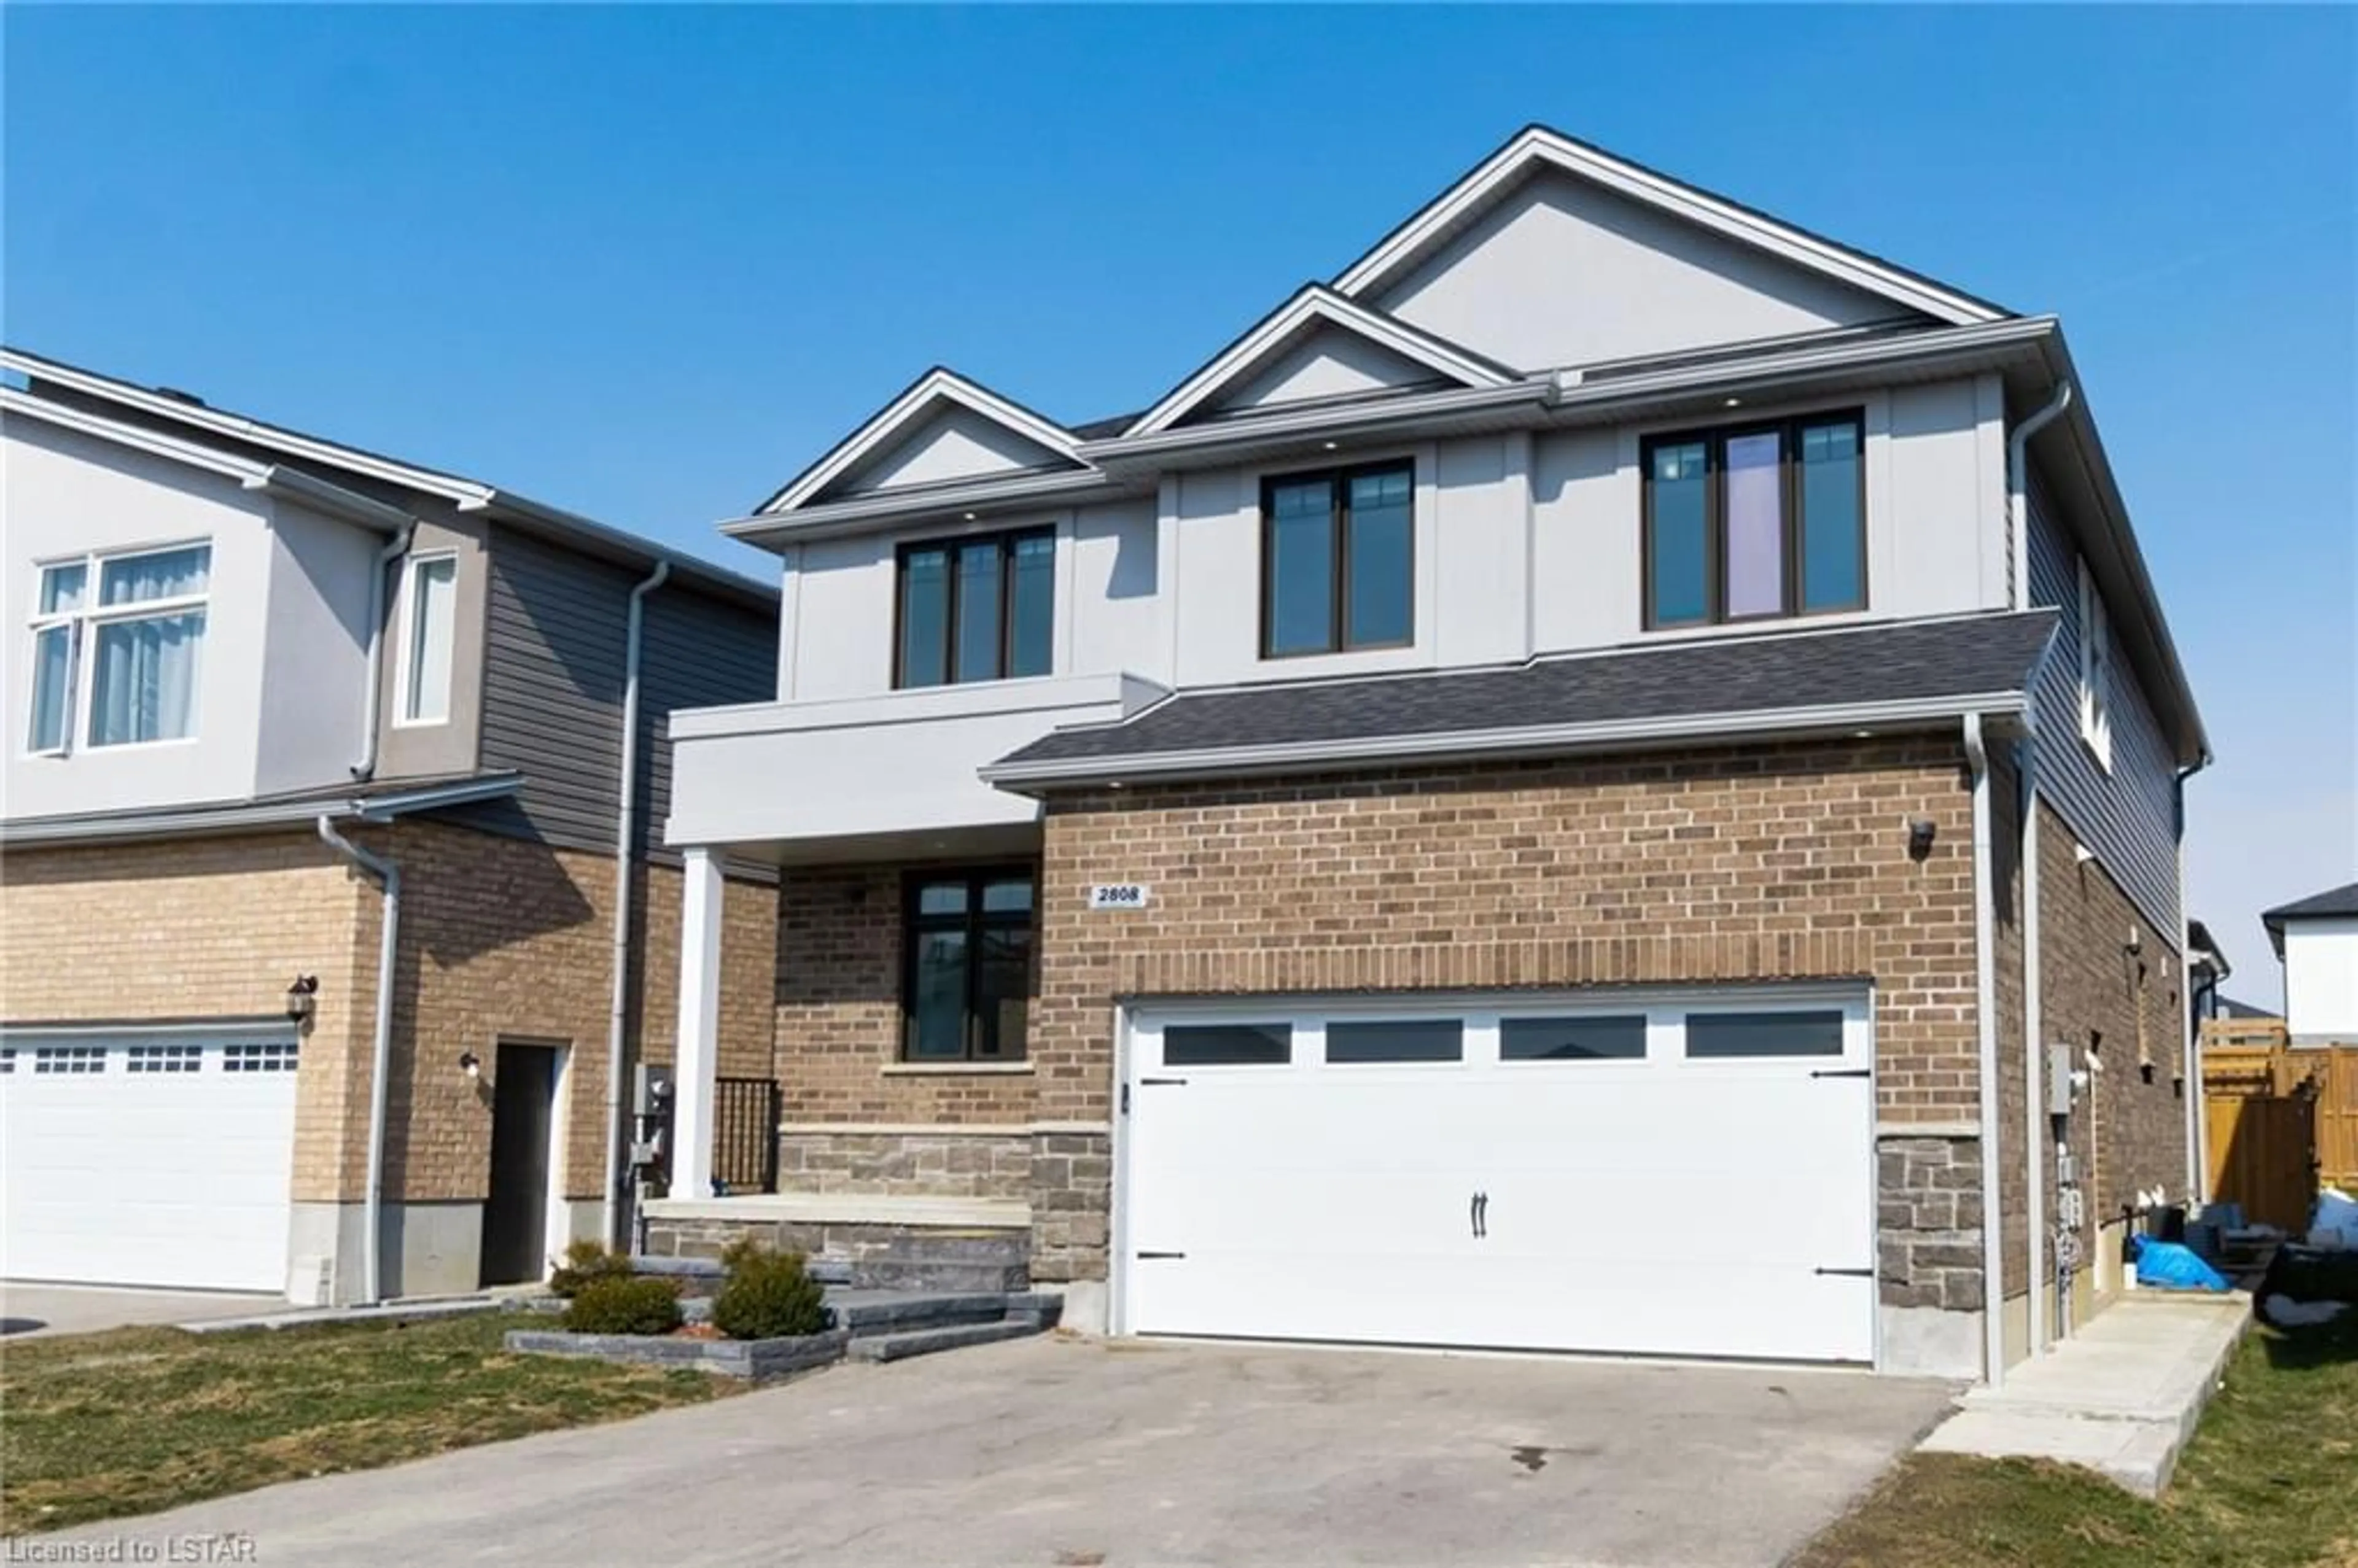 Home with brick exterior material for 2808 Heardcreek Trail, London Ontario N6G 0W1